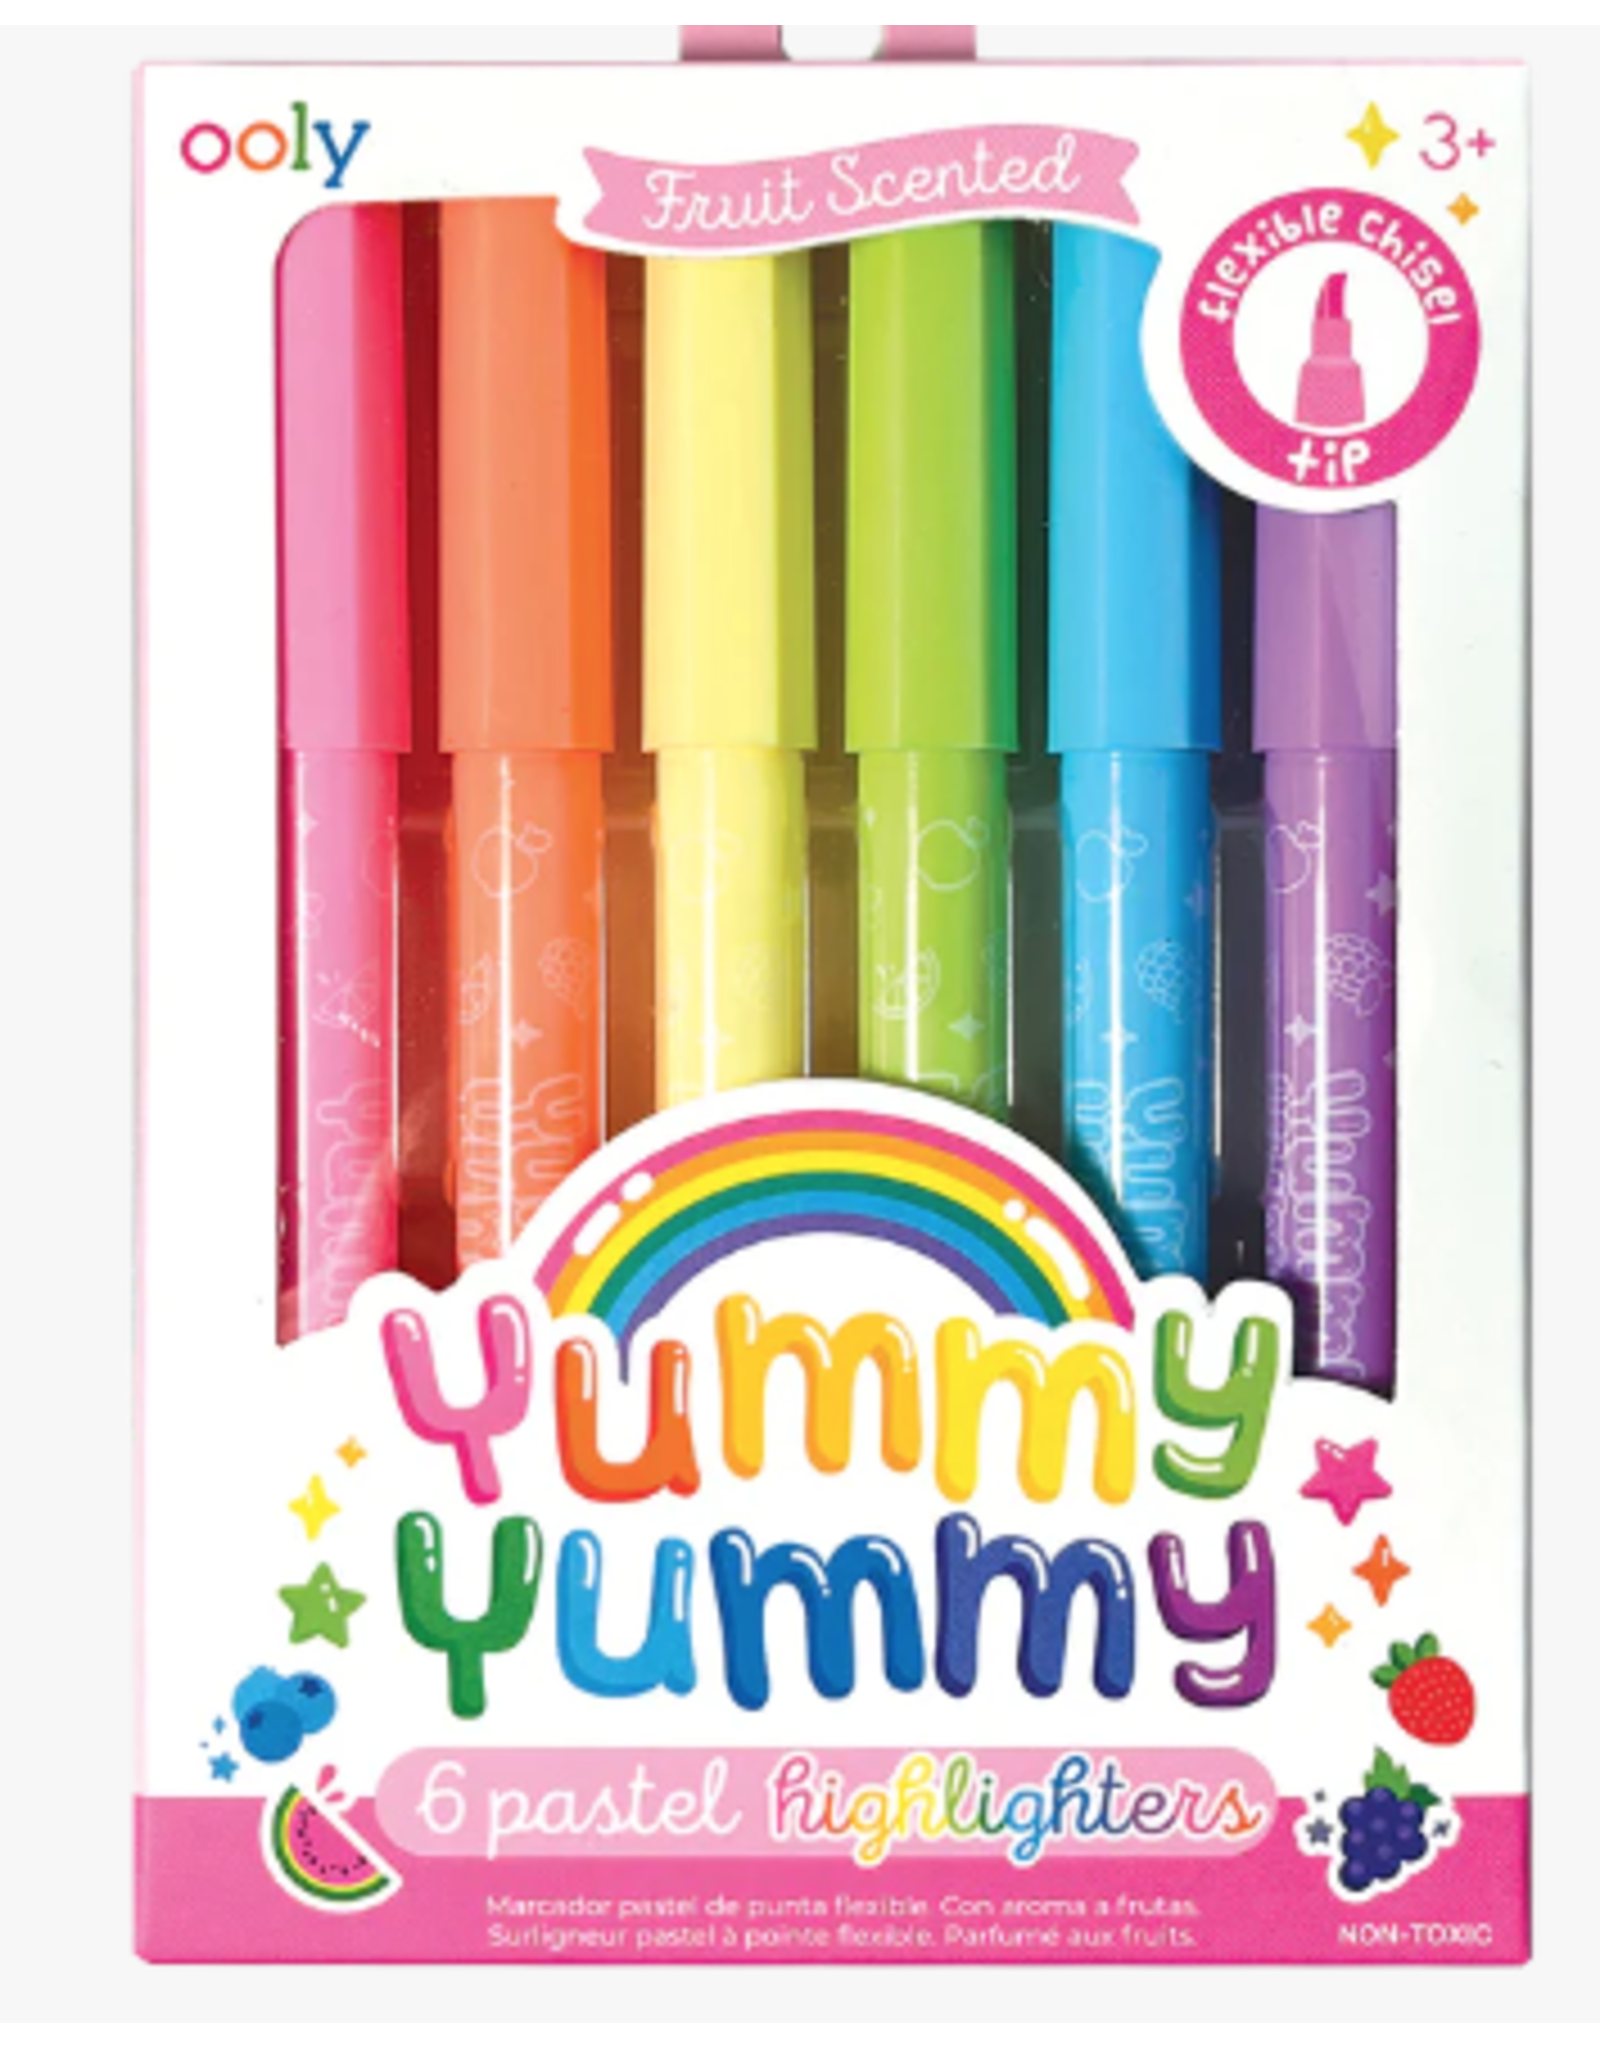 Ooly Yummy Yummy Scented Pastel Highlighters 6 pack